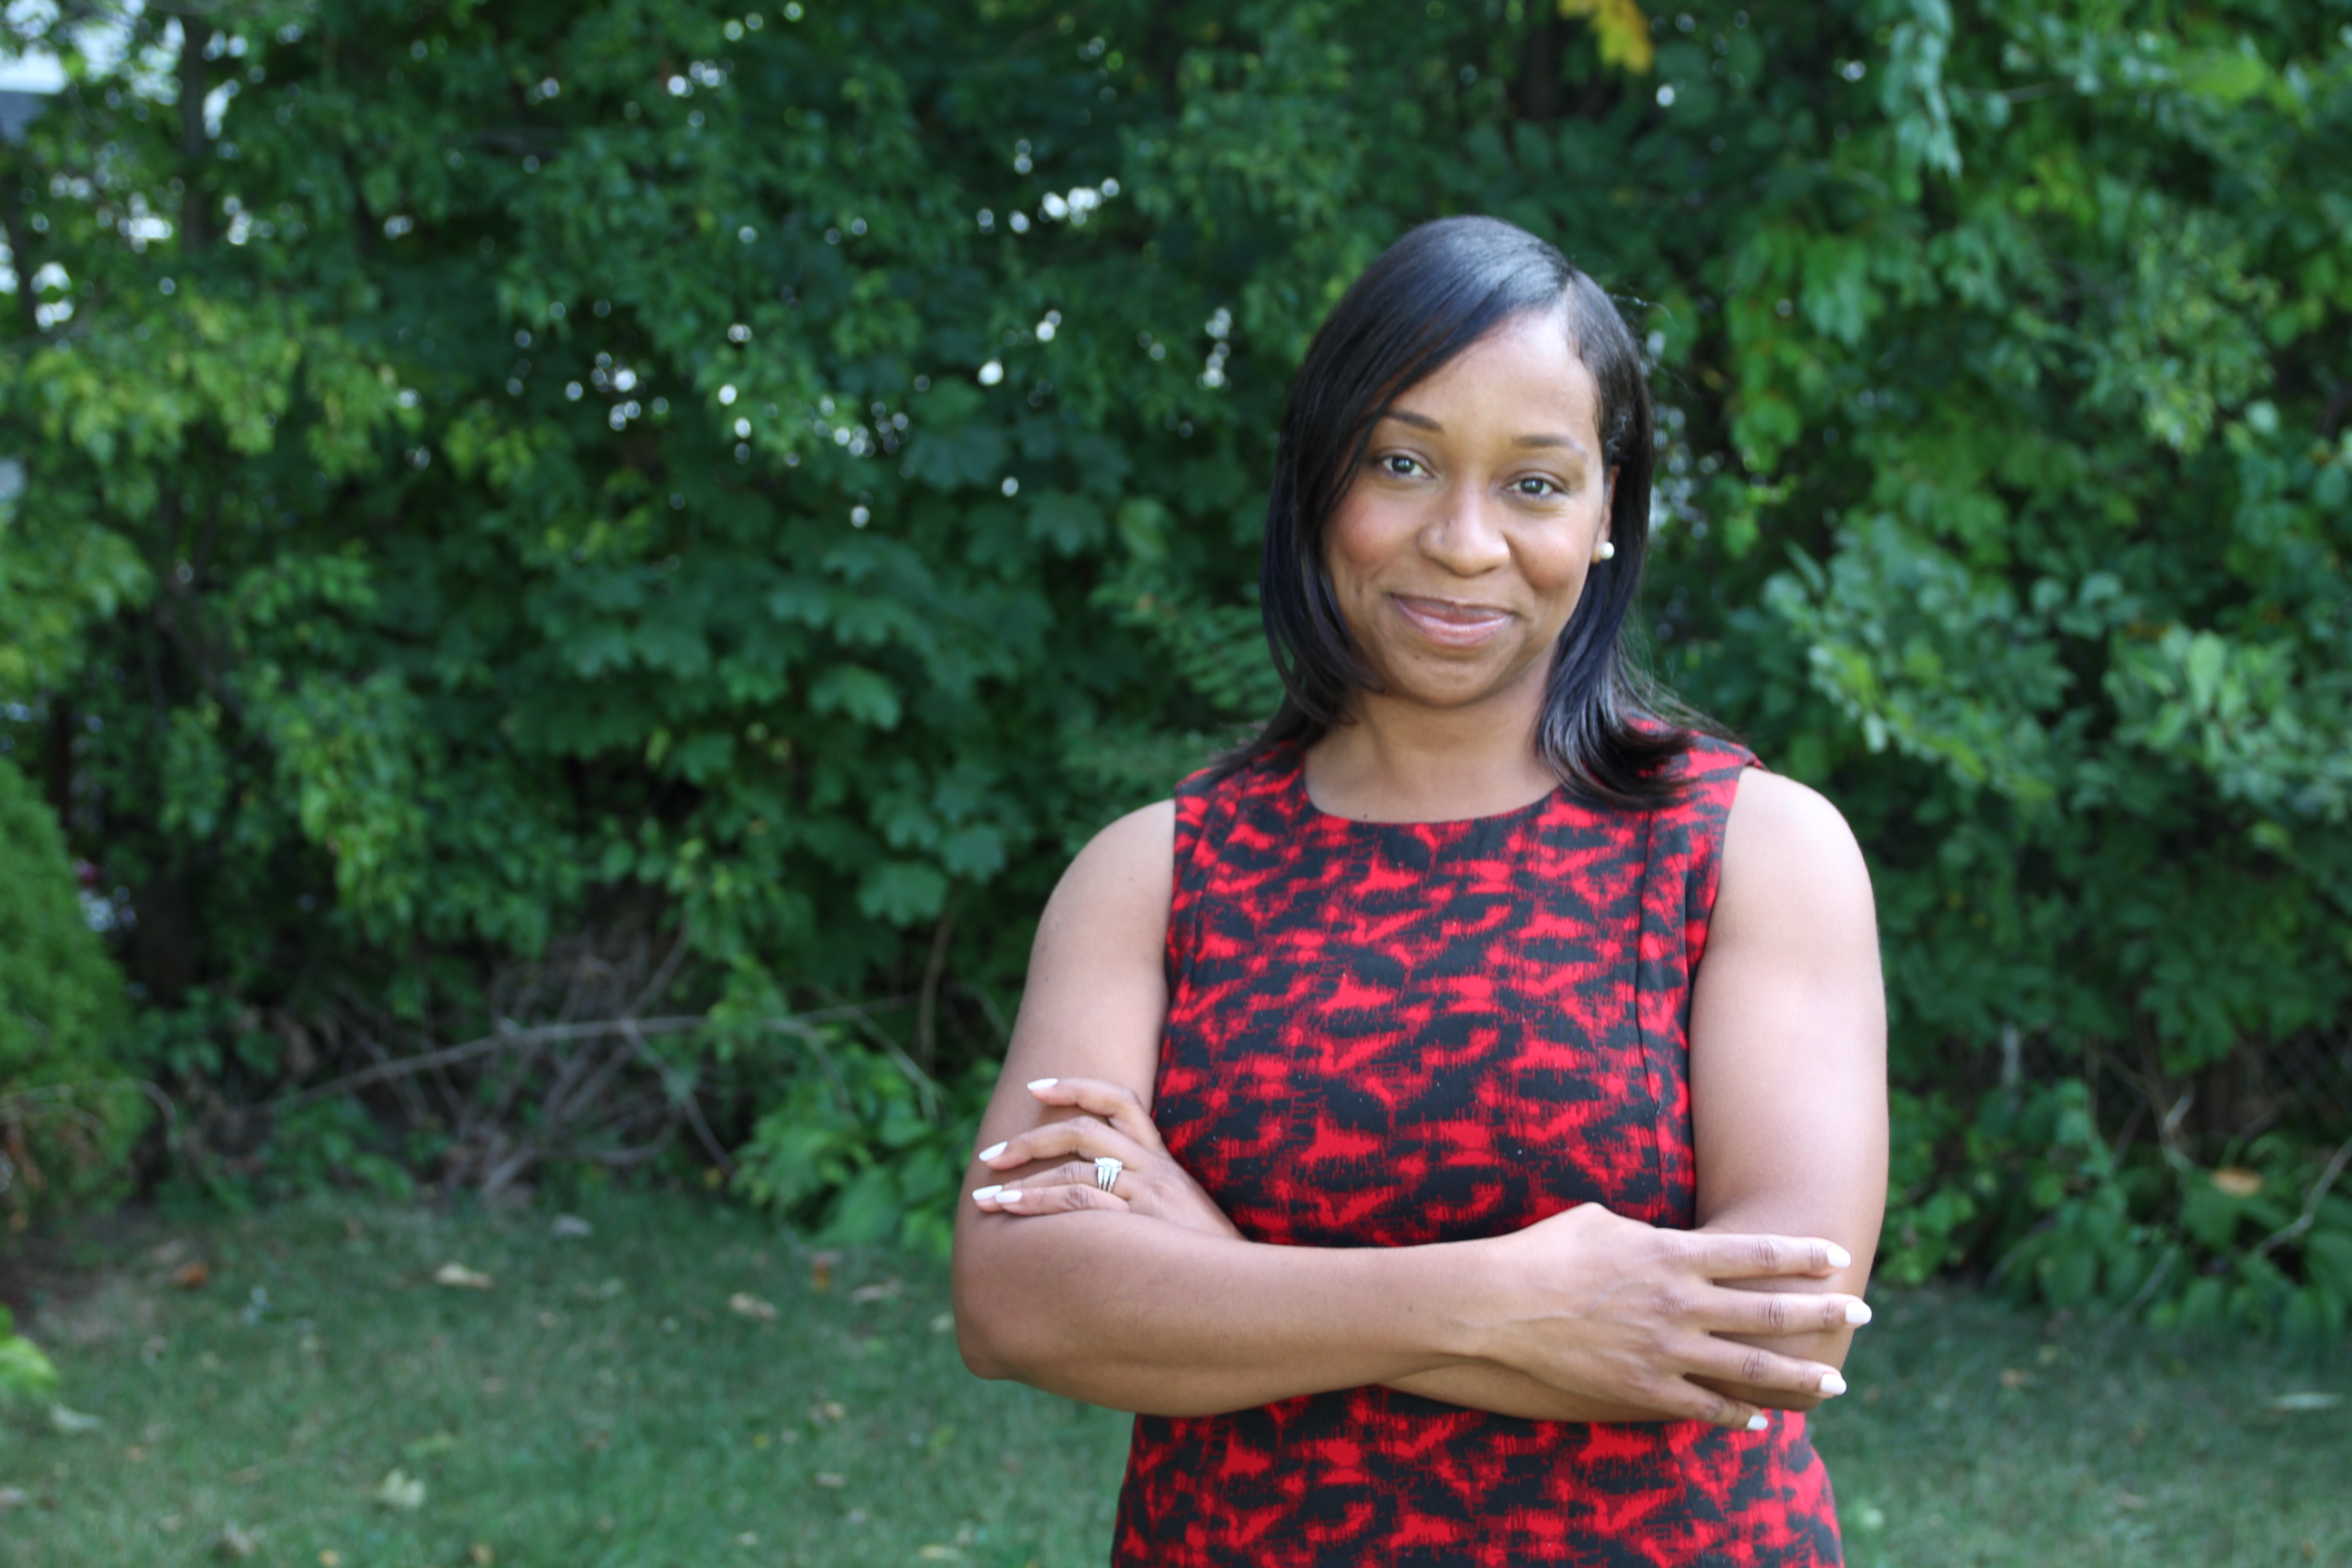 Mayoral candidate and Boston City Councilor Andrea Campbell